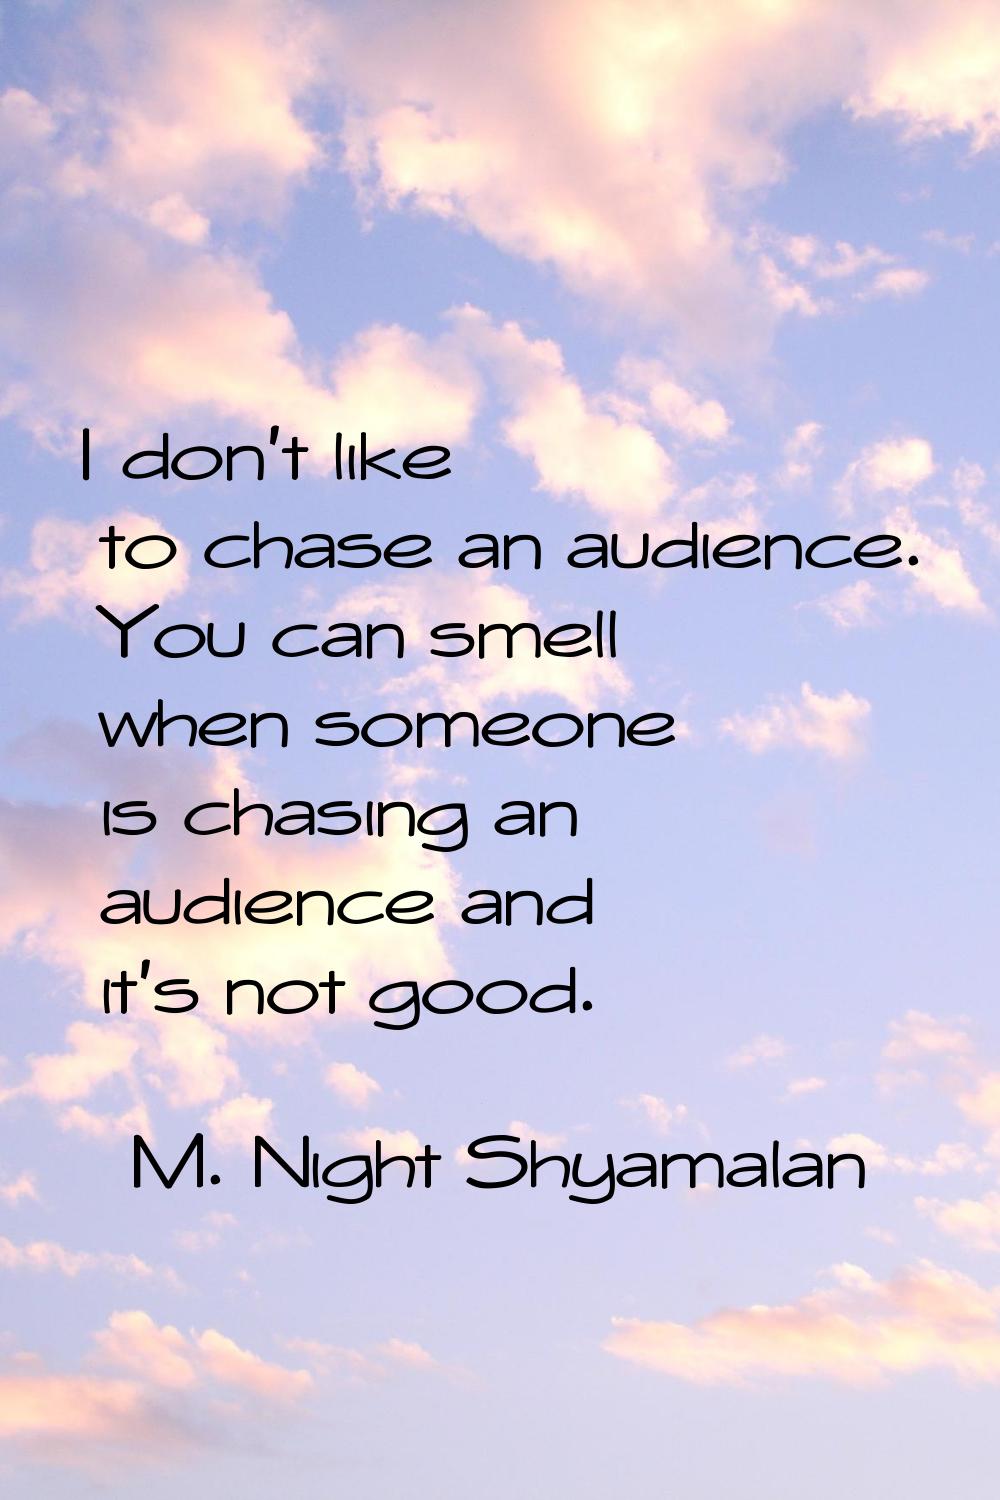 I don't like to chase an audience. You can smell when someone is chasing an audience and it's not g